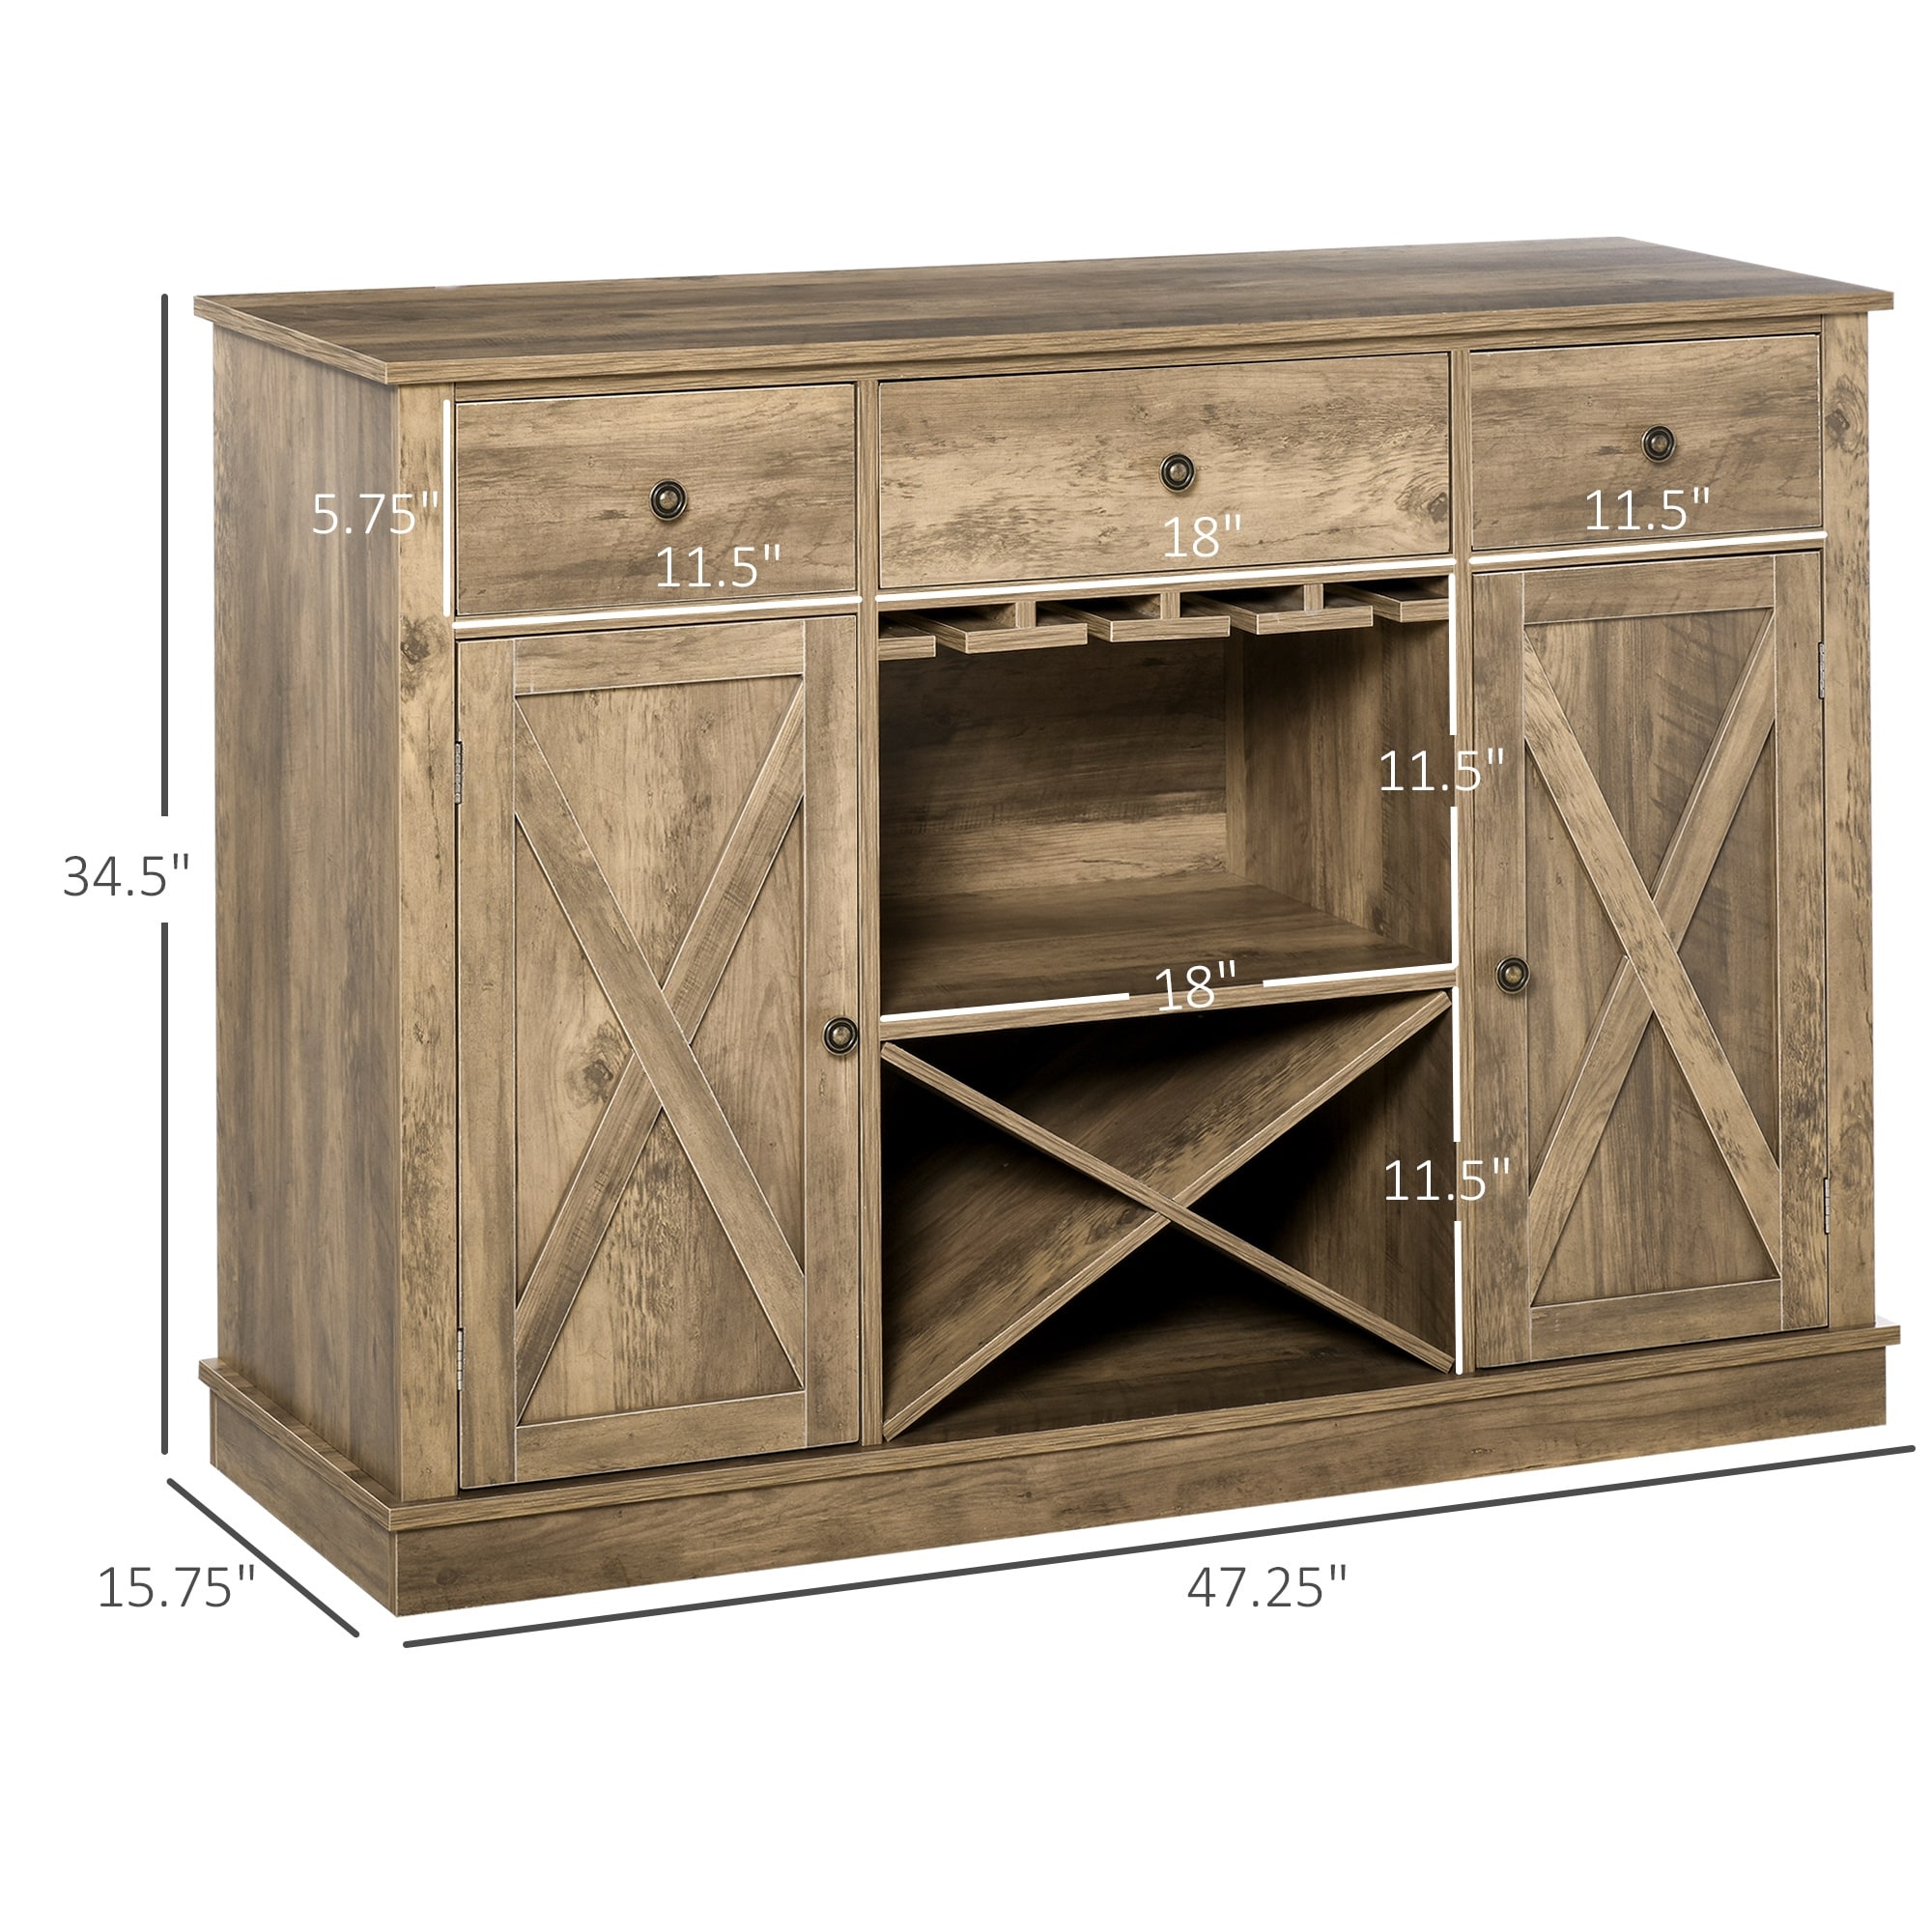 https://ak1.ostkcdn.com/images/products/is/images/direct/713511d03dc251290b3b4eb7c179b6ef404a65f6/HOMCOM-Farmhouse-Sideboard-Buffet-Table-Storage-Cabinet-with-3-Drawers%2C-X-Shaped-Wine-Rack%2C-Stemware-Holder%2C-%26-Cabinets.jpg